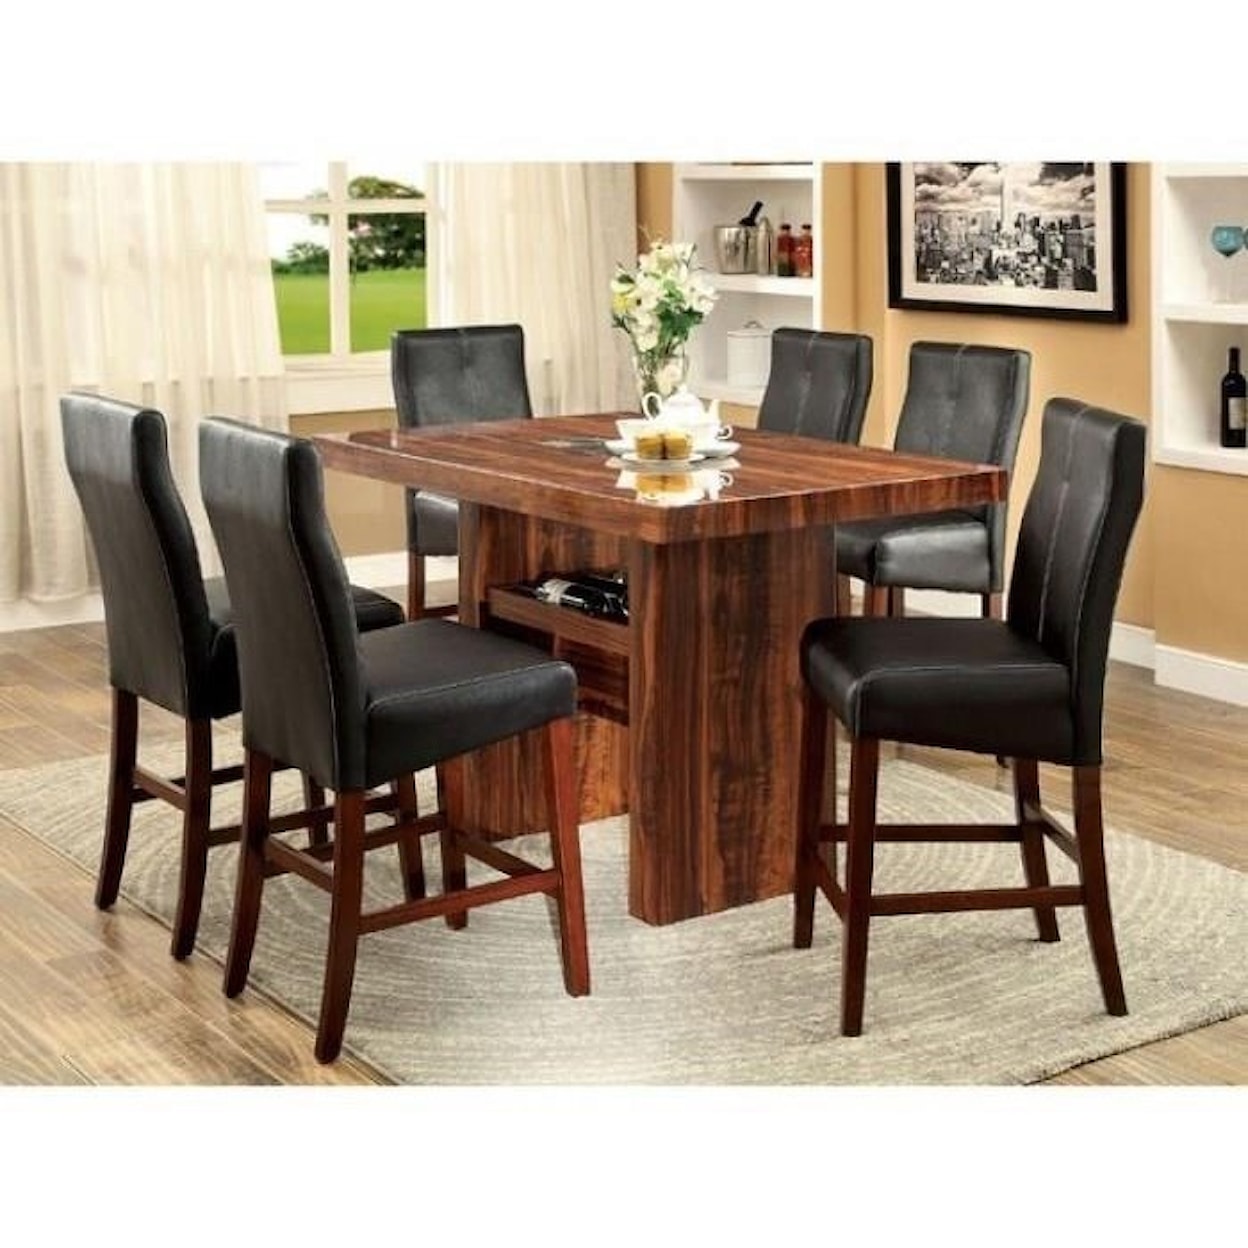 FUSA Bonneville II Table and Chair Set